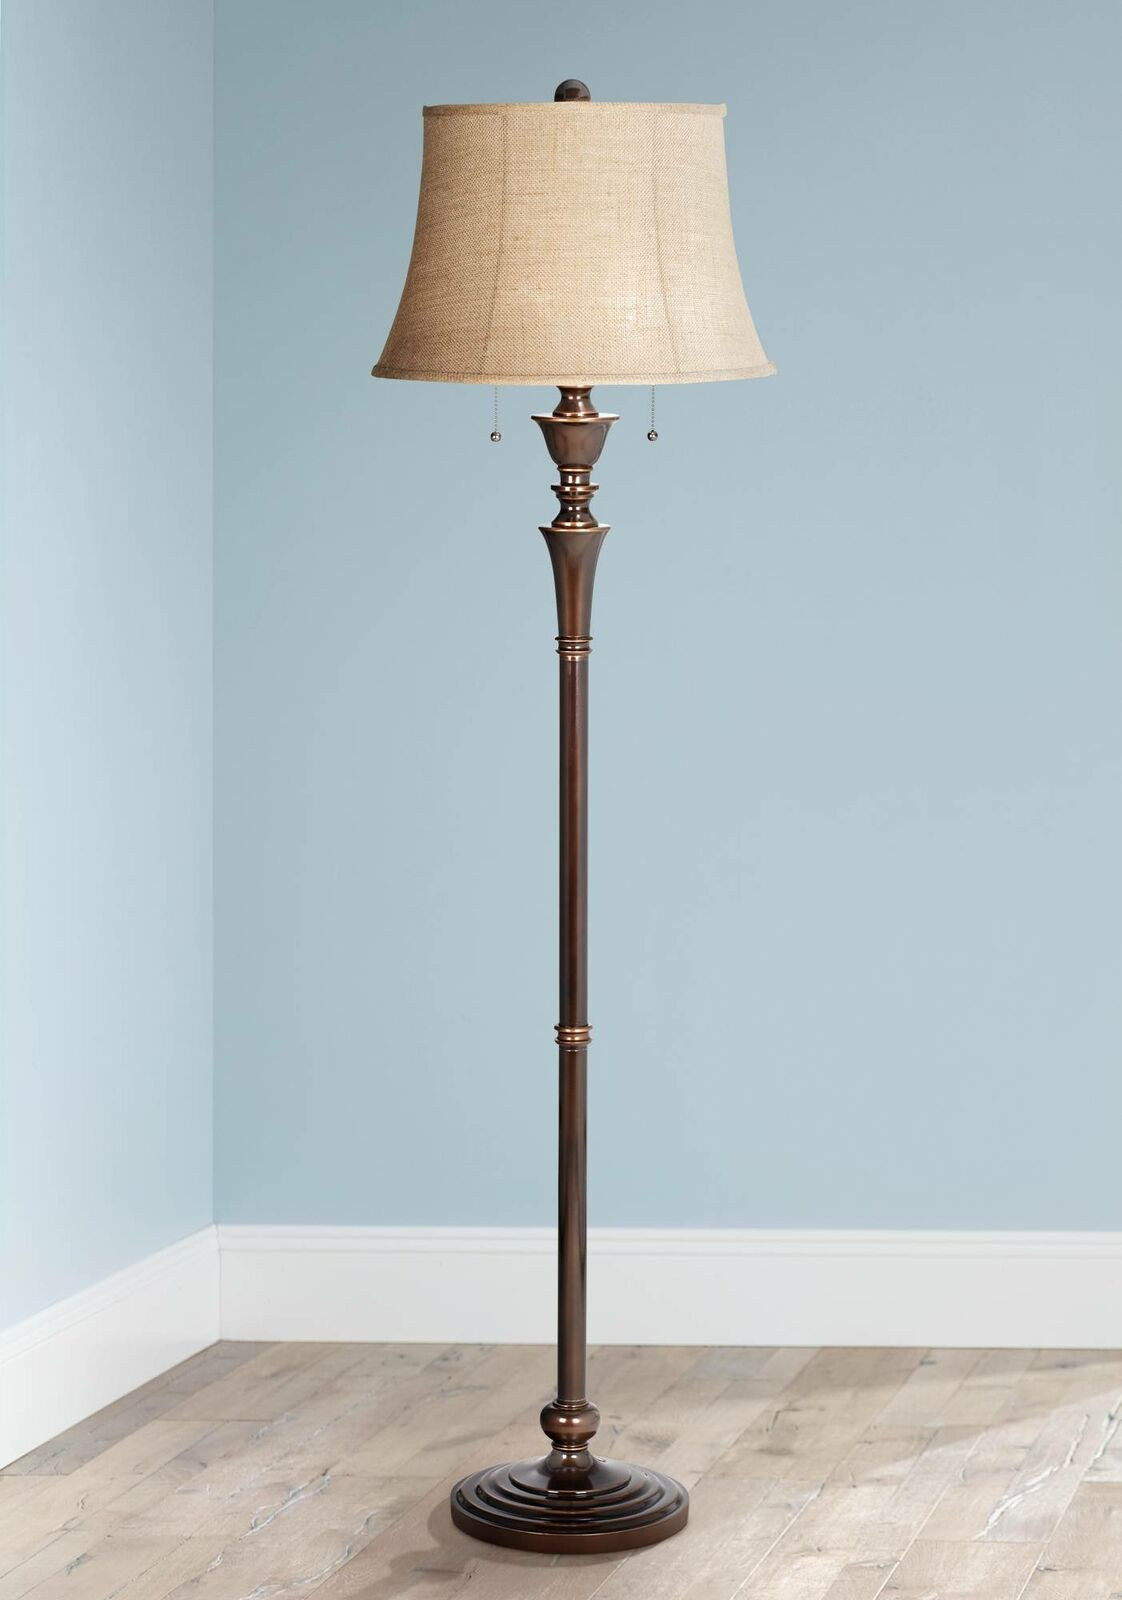 Rich Bronze Floor Lamp Copper Accents Burlap Bell Shade For Living Room Light inside size 1122 X 1600